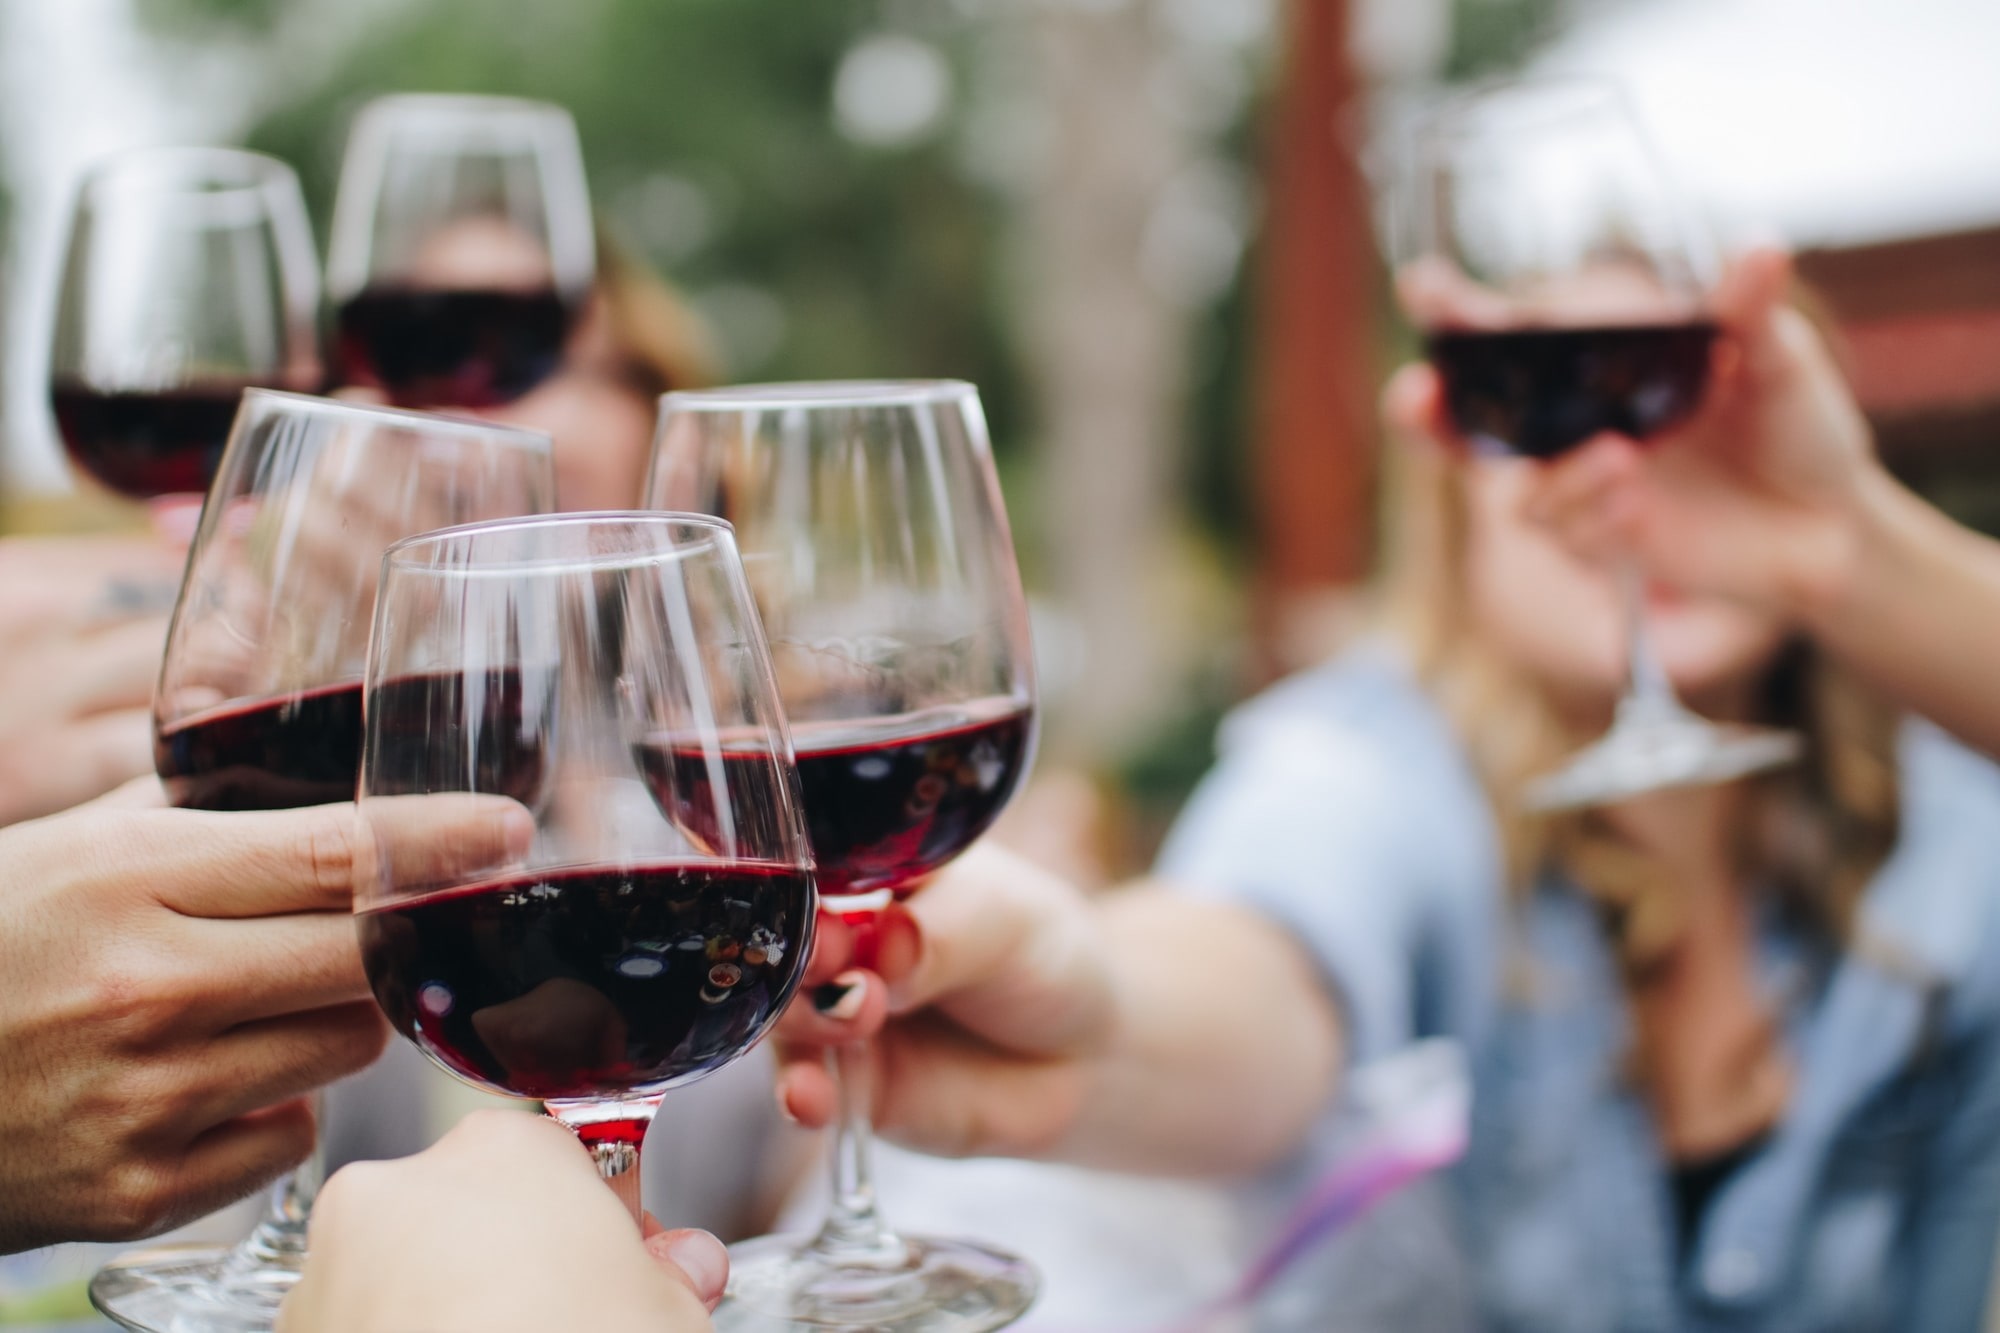 LIMO WINE TOURS IN AUSTIN, TX